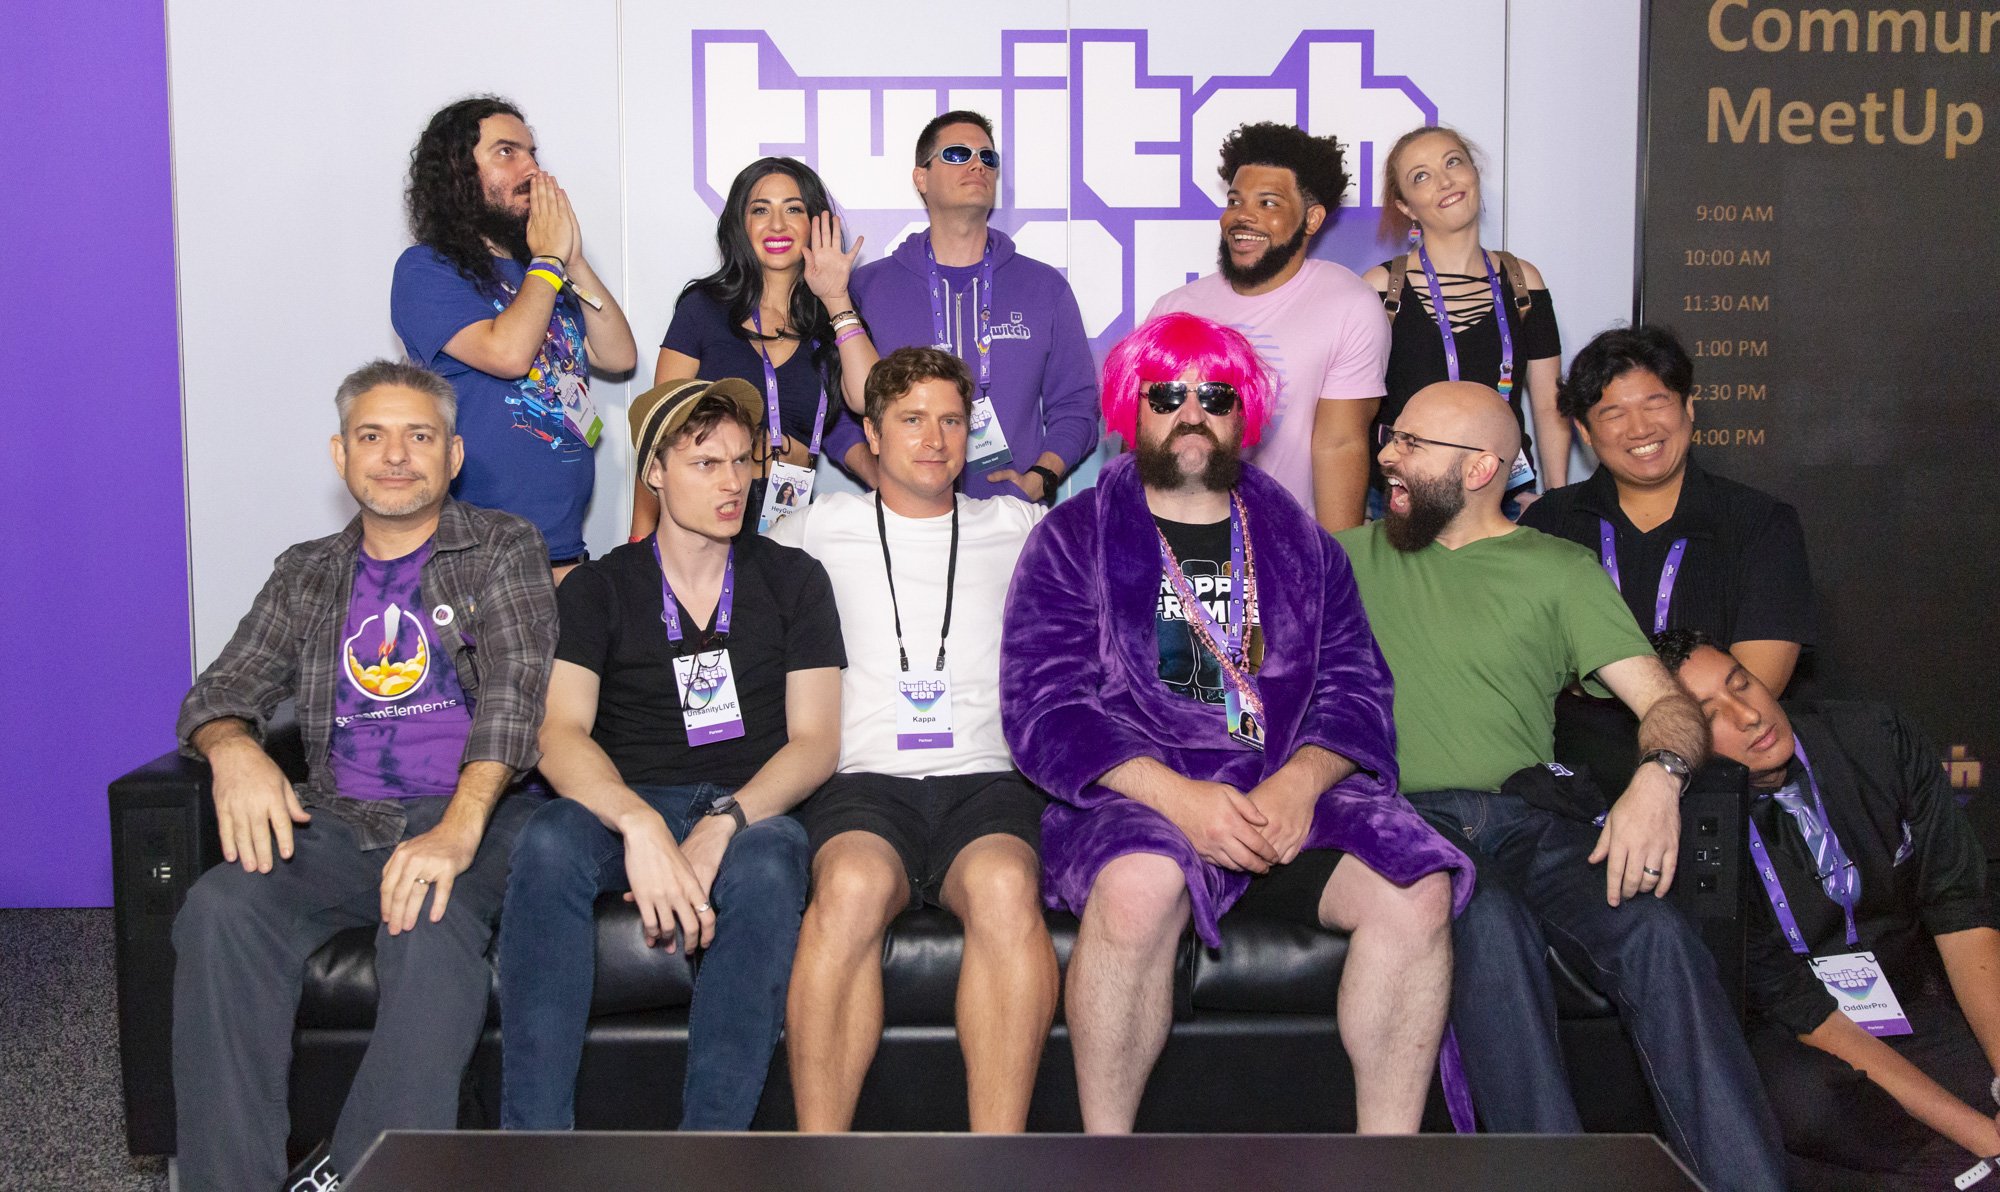 StreamElements on "Since we have a couple Twitch global emotes on staff, here's round-up from TwitchCon with emotes like BCWarrior, TriHard, DatSheffy, UnSane, HeyGuys, BlessRNG, ResidentSeeper, SwiftRage, PRChase, &amp;